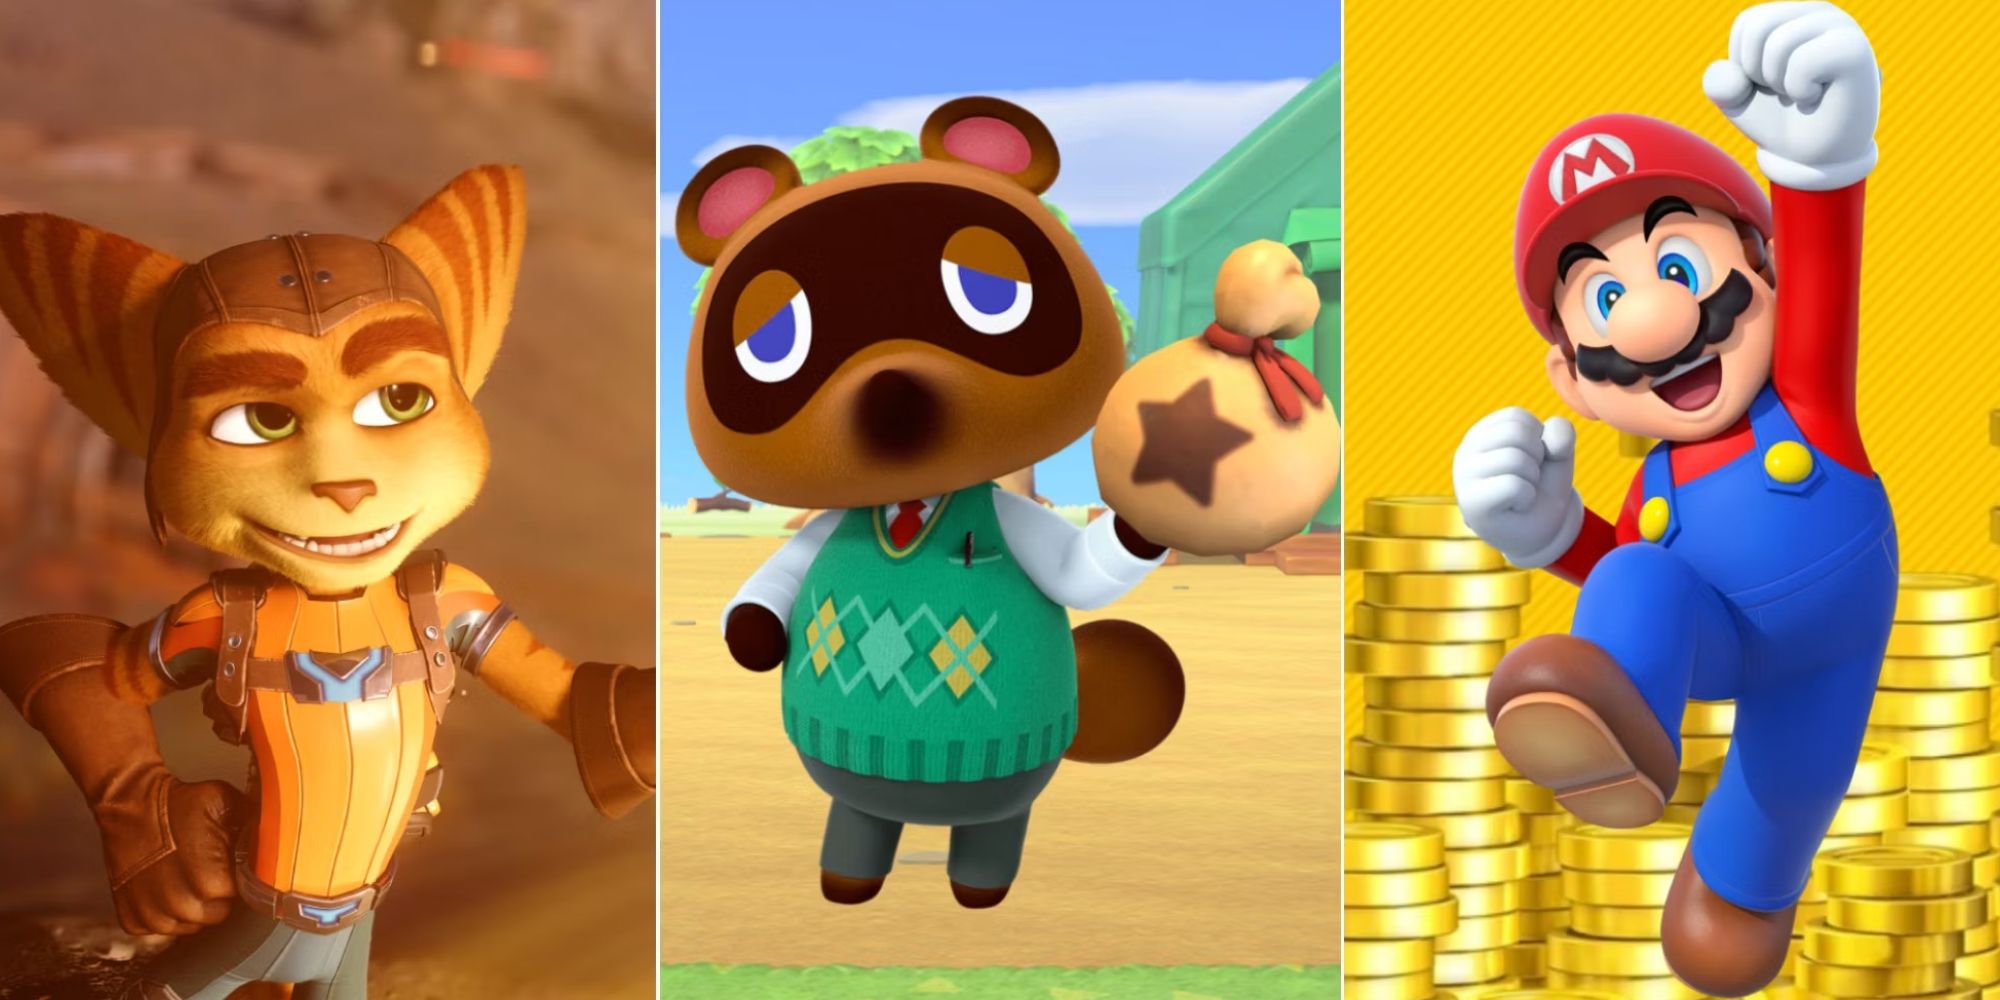 Games with unique currency - Ratchet and Clank, Animal Crossing, Super Mario